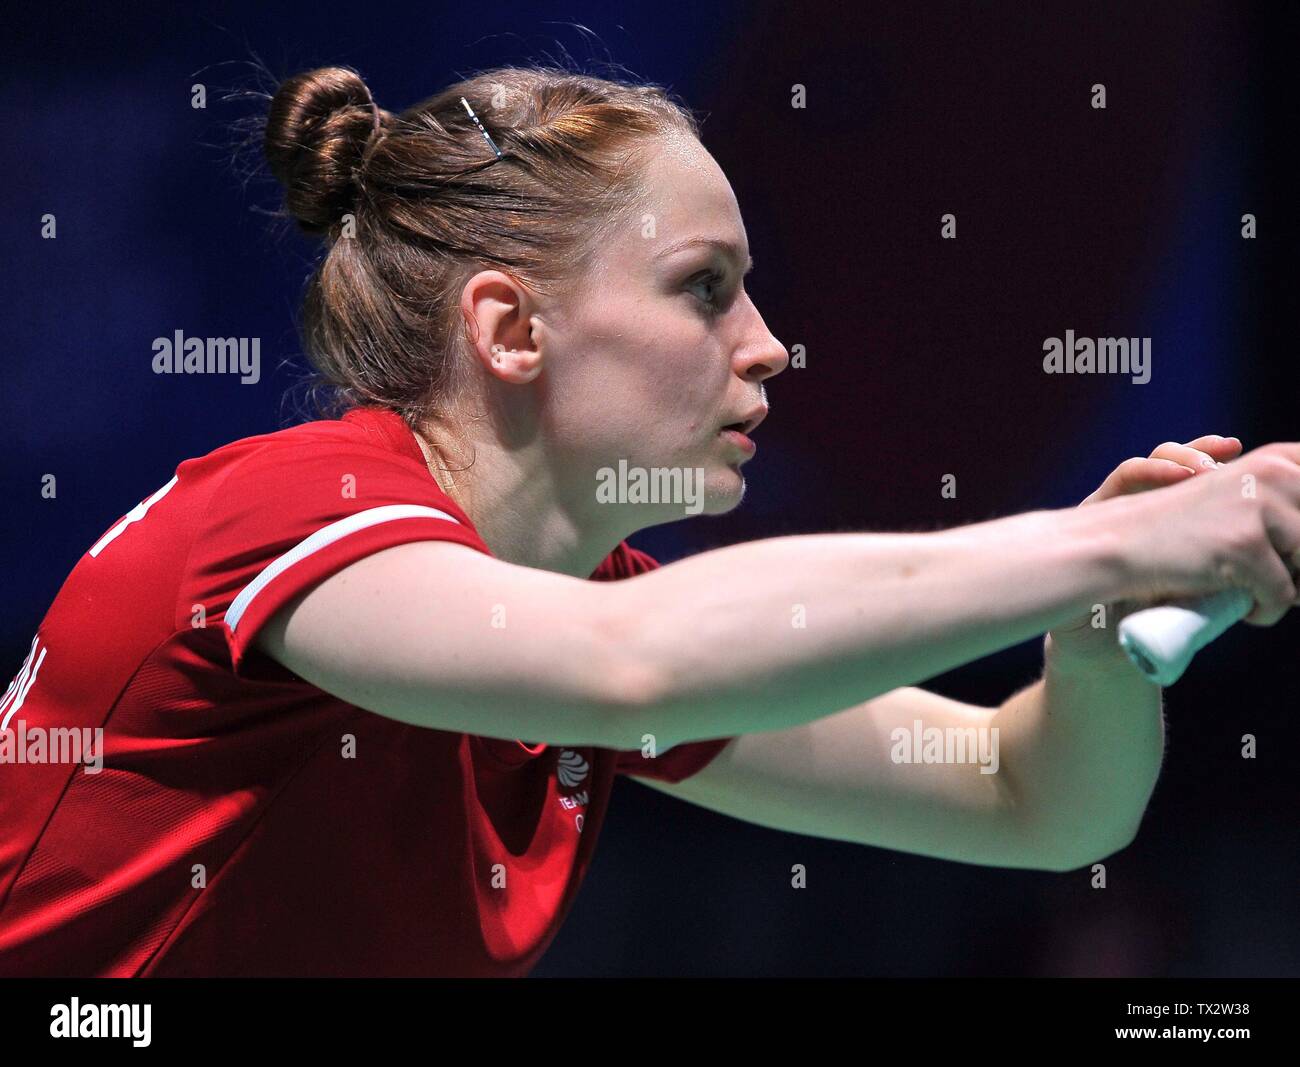 Minsk. Belarus. 24 June 2019. M Ellis and L Smith (GBR) play in the group stages of the Mixed doubles Badminton competition at the 2nd European games. Minsk Arena. Credit: Sport In Pictures/Alamy Live News Stock Photo